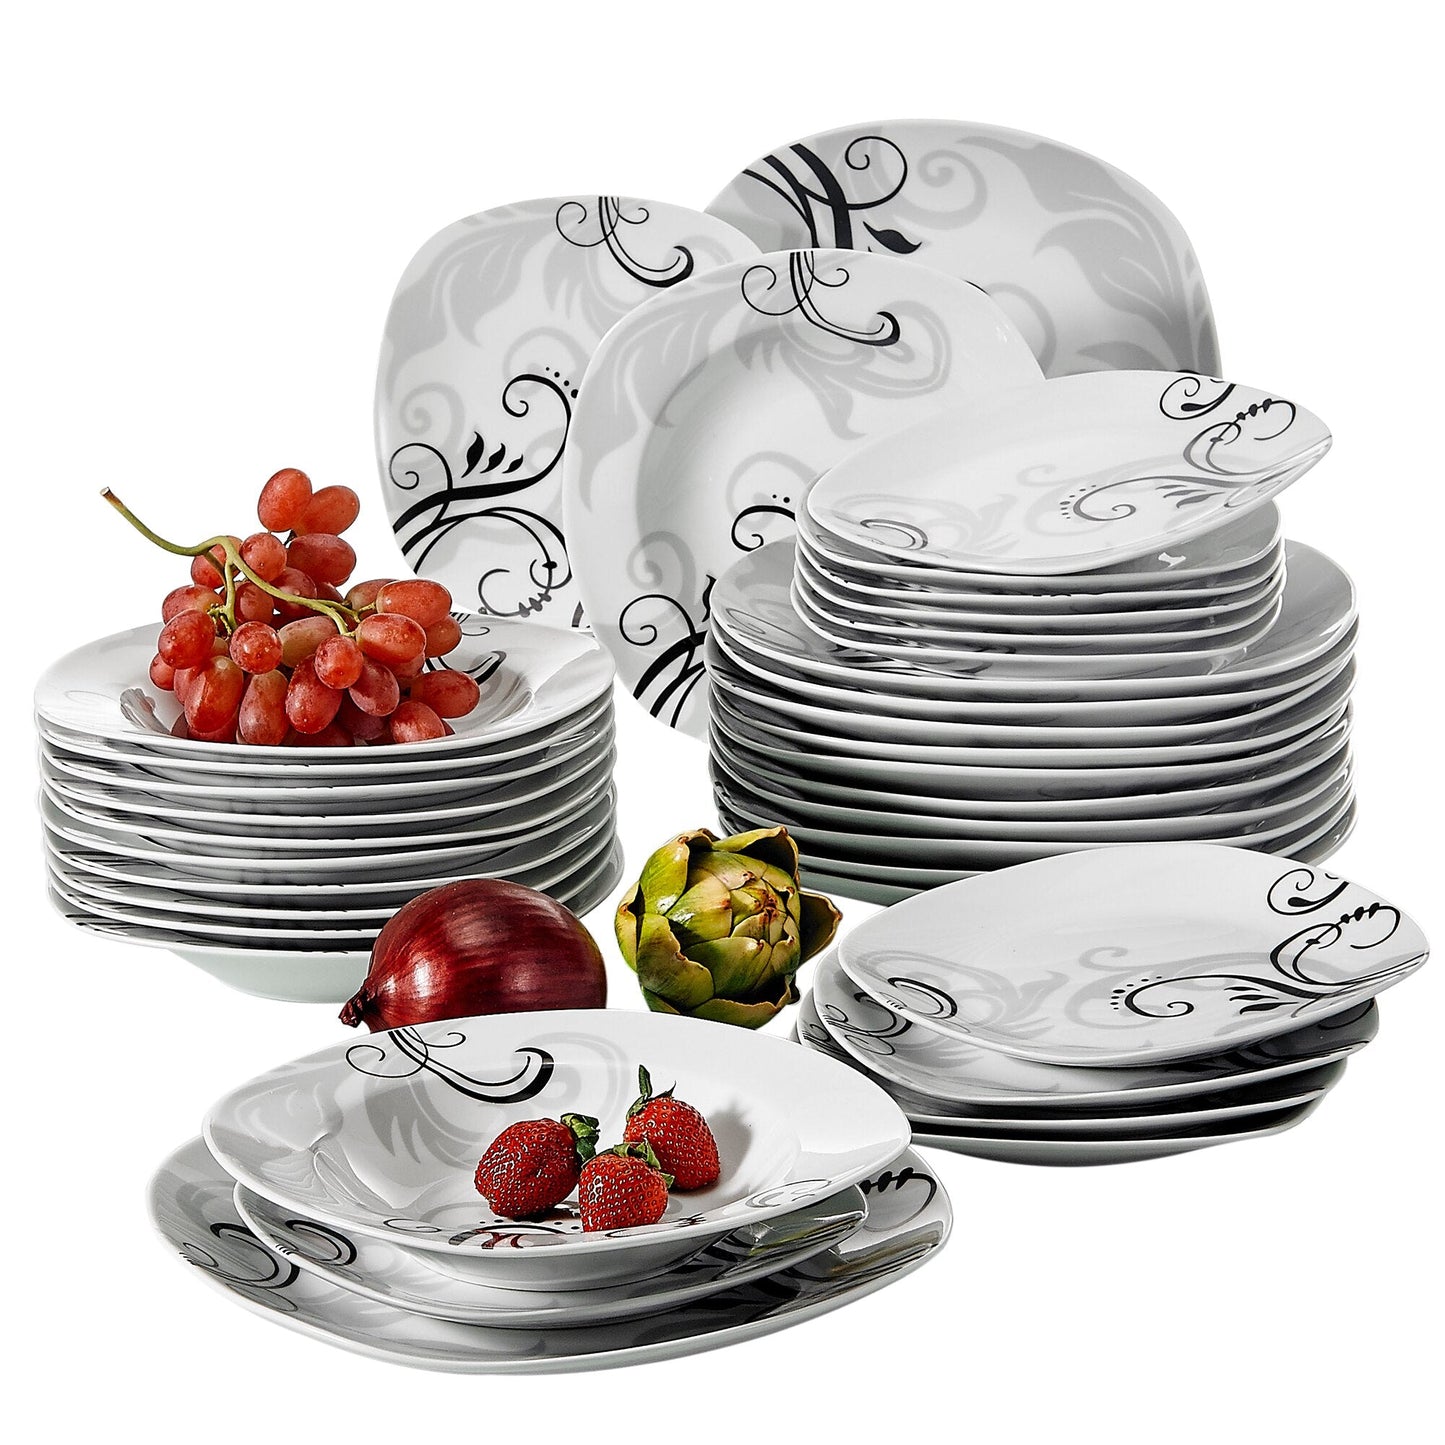 ZOEY 36-Piece Porcelain Ceramic Dinnerware Set Decal Pattern Kitchen Plate Set with Dinner Plate,Soup Plate,Dessert Plate - Nordic Side - 36, Ceramic, Decal, Dinner, Dinnerware, Kitchen, Patt